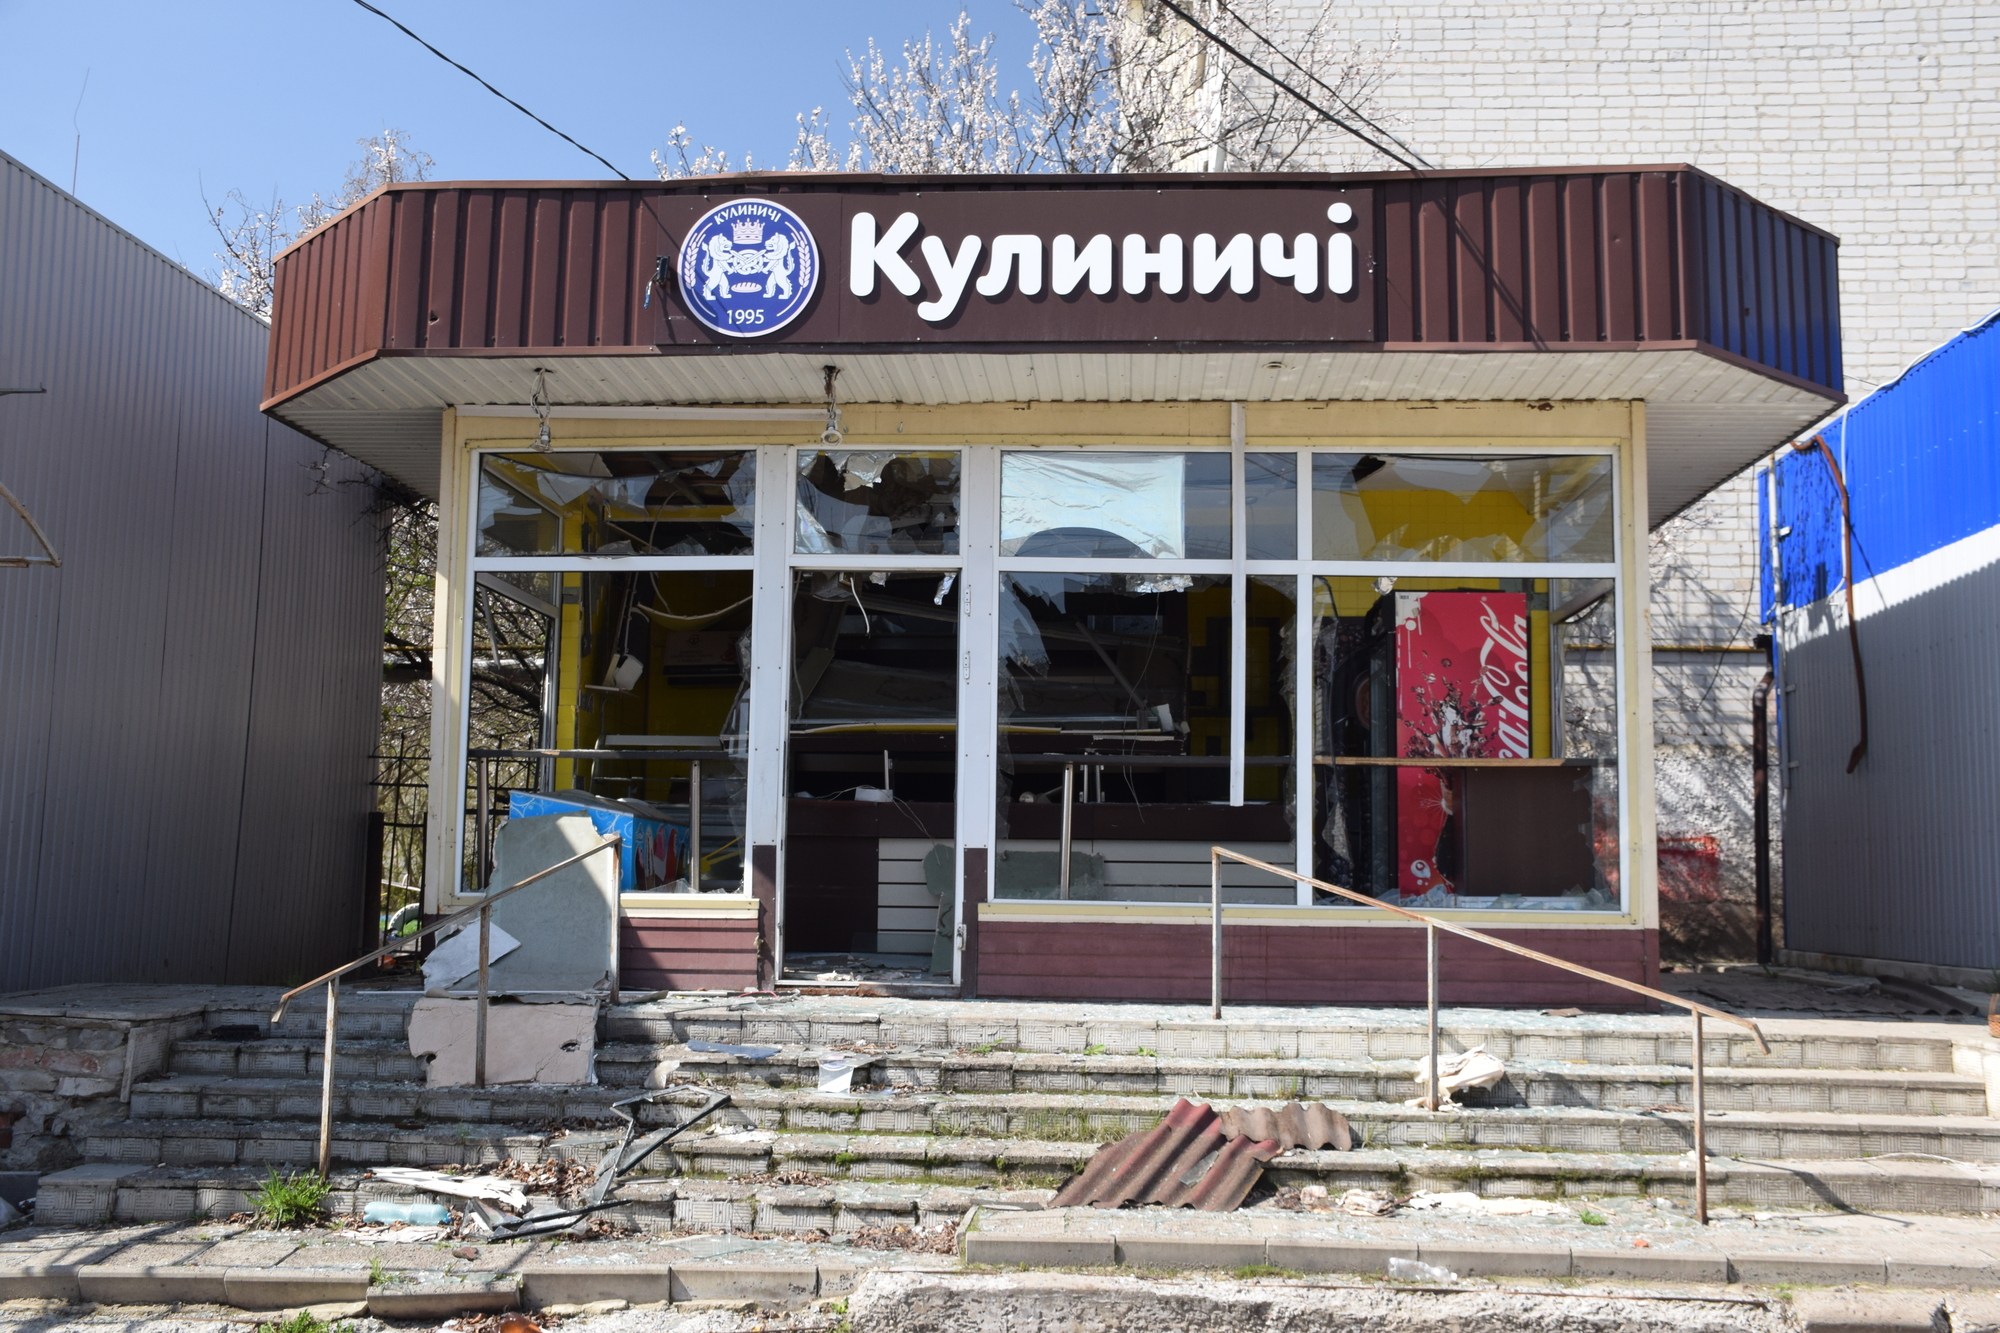 Most Ukrainian Businesses Are Not Ready to Sue Russia for Damaged Property